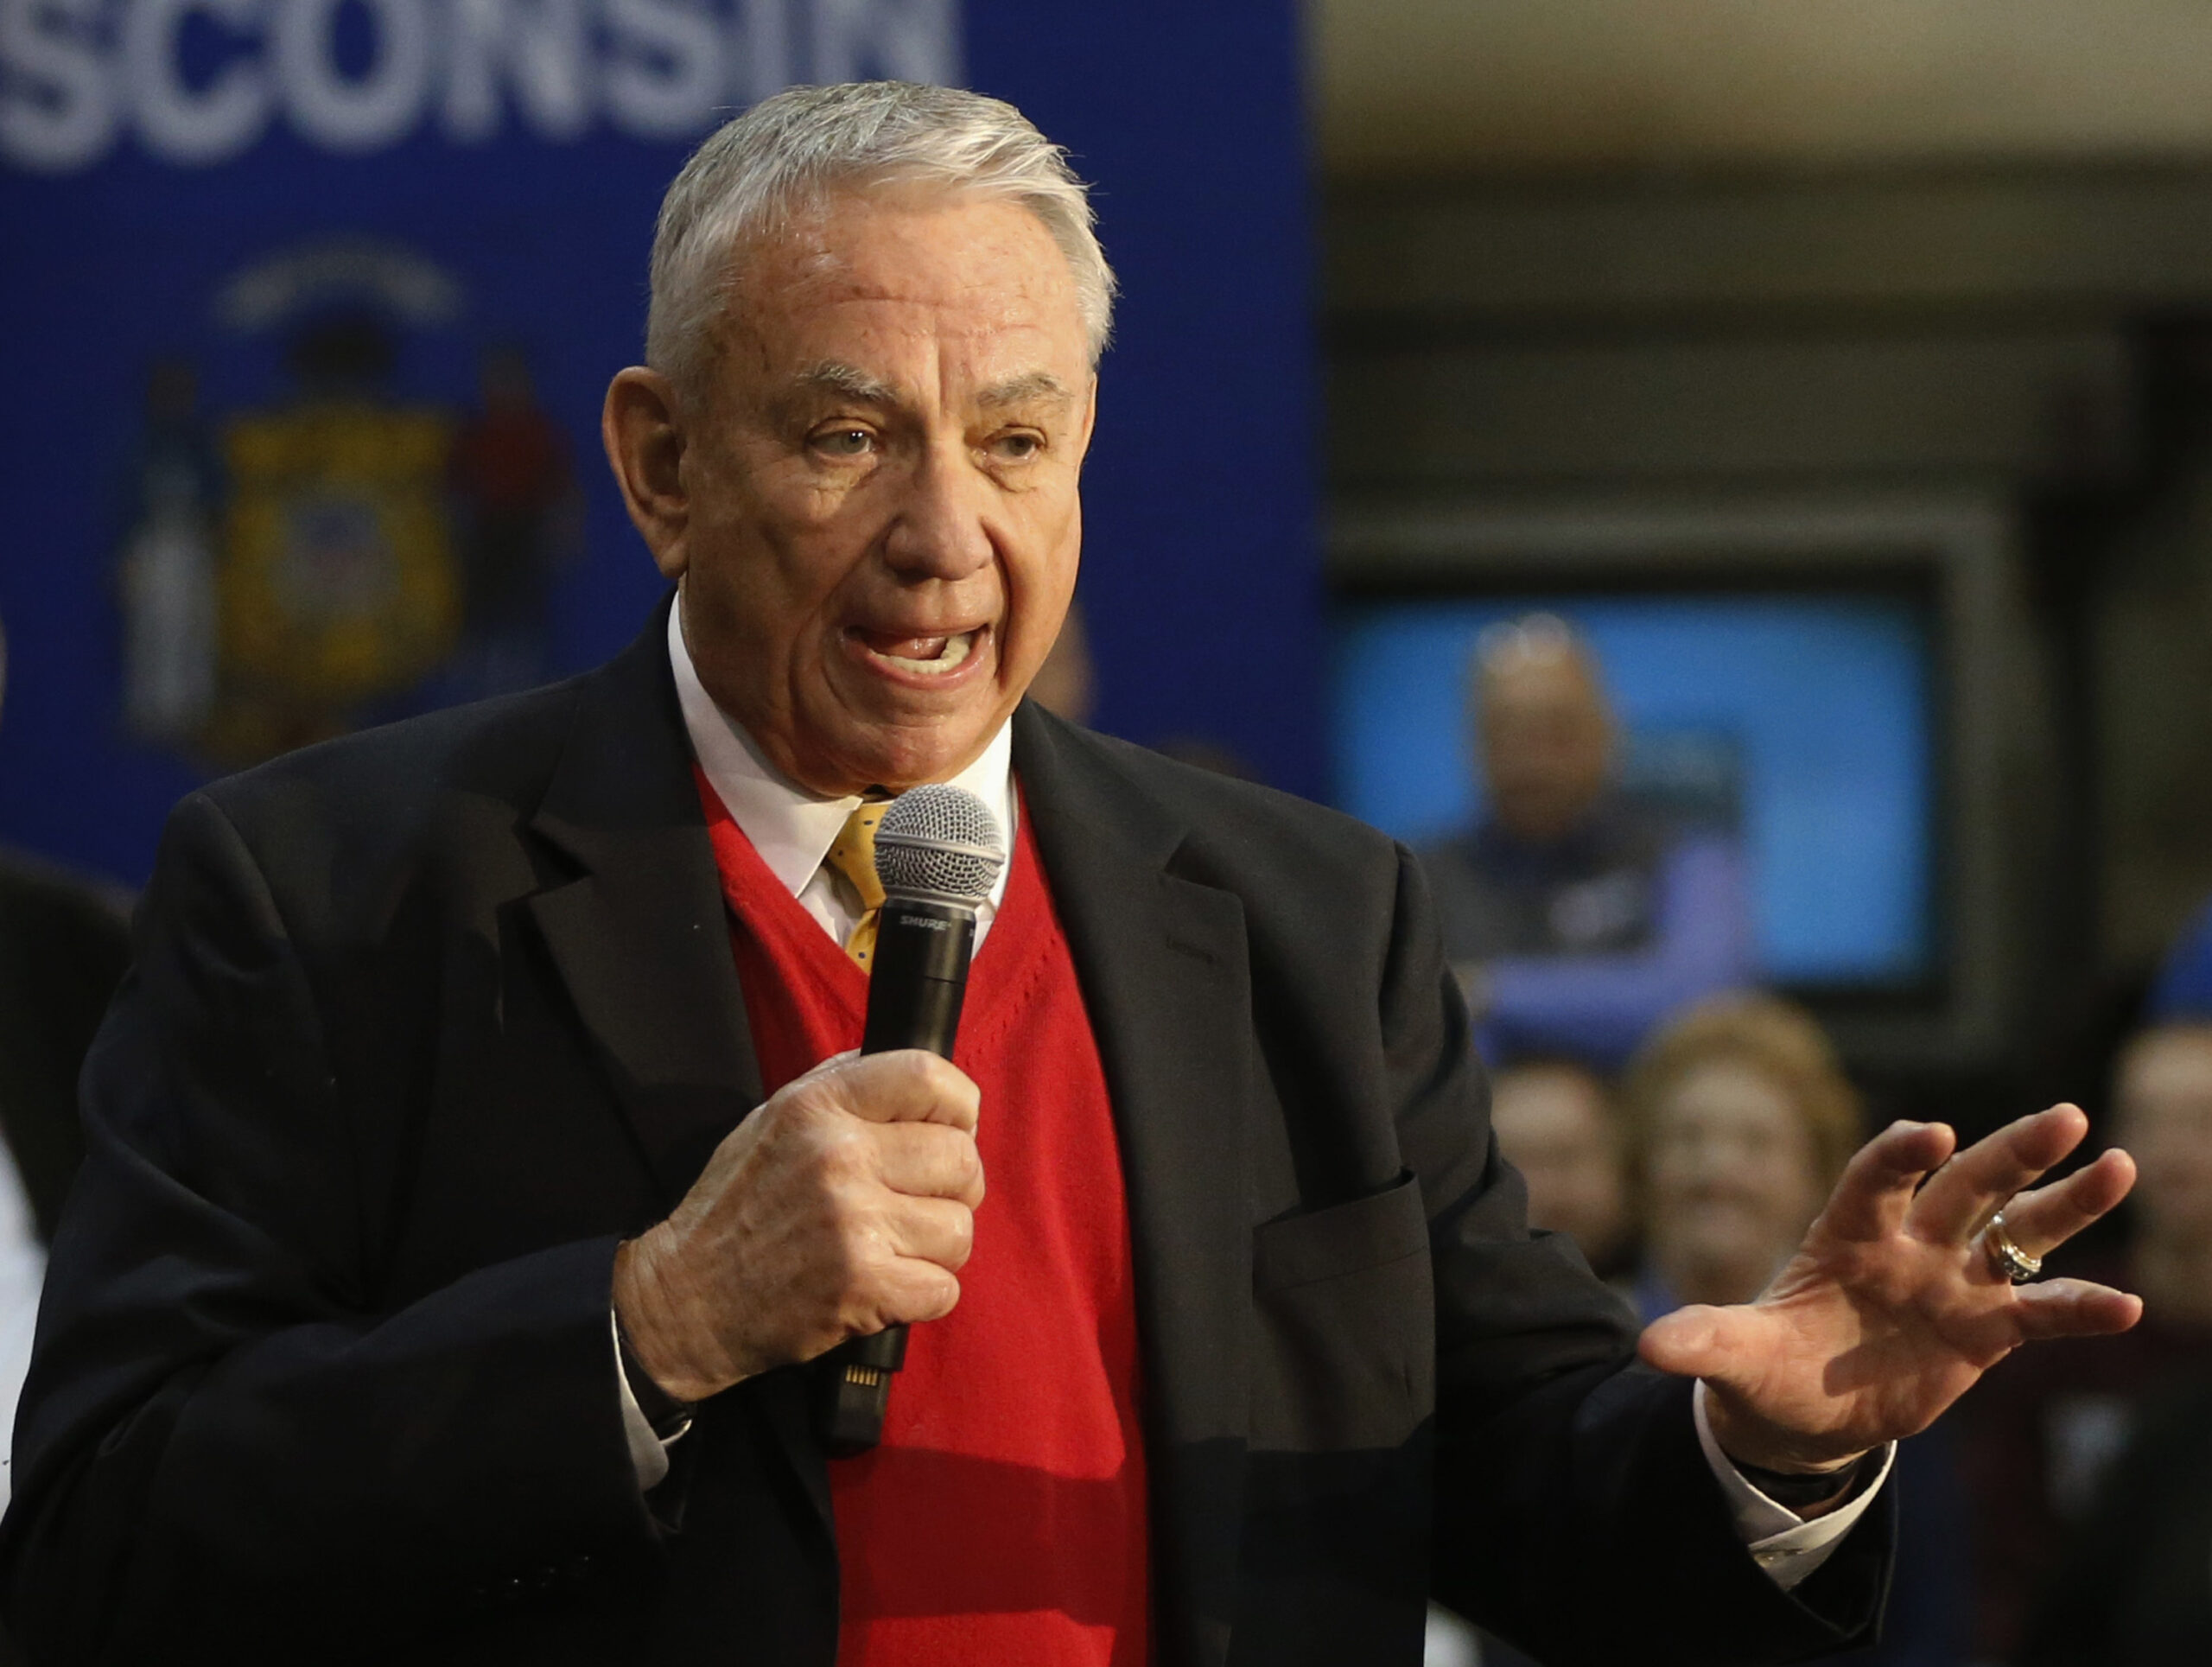 UW’s Tommy Thompson: Turn Wisconsin Prison Into College For Inmates